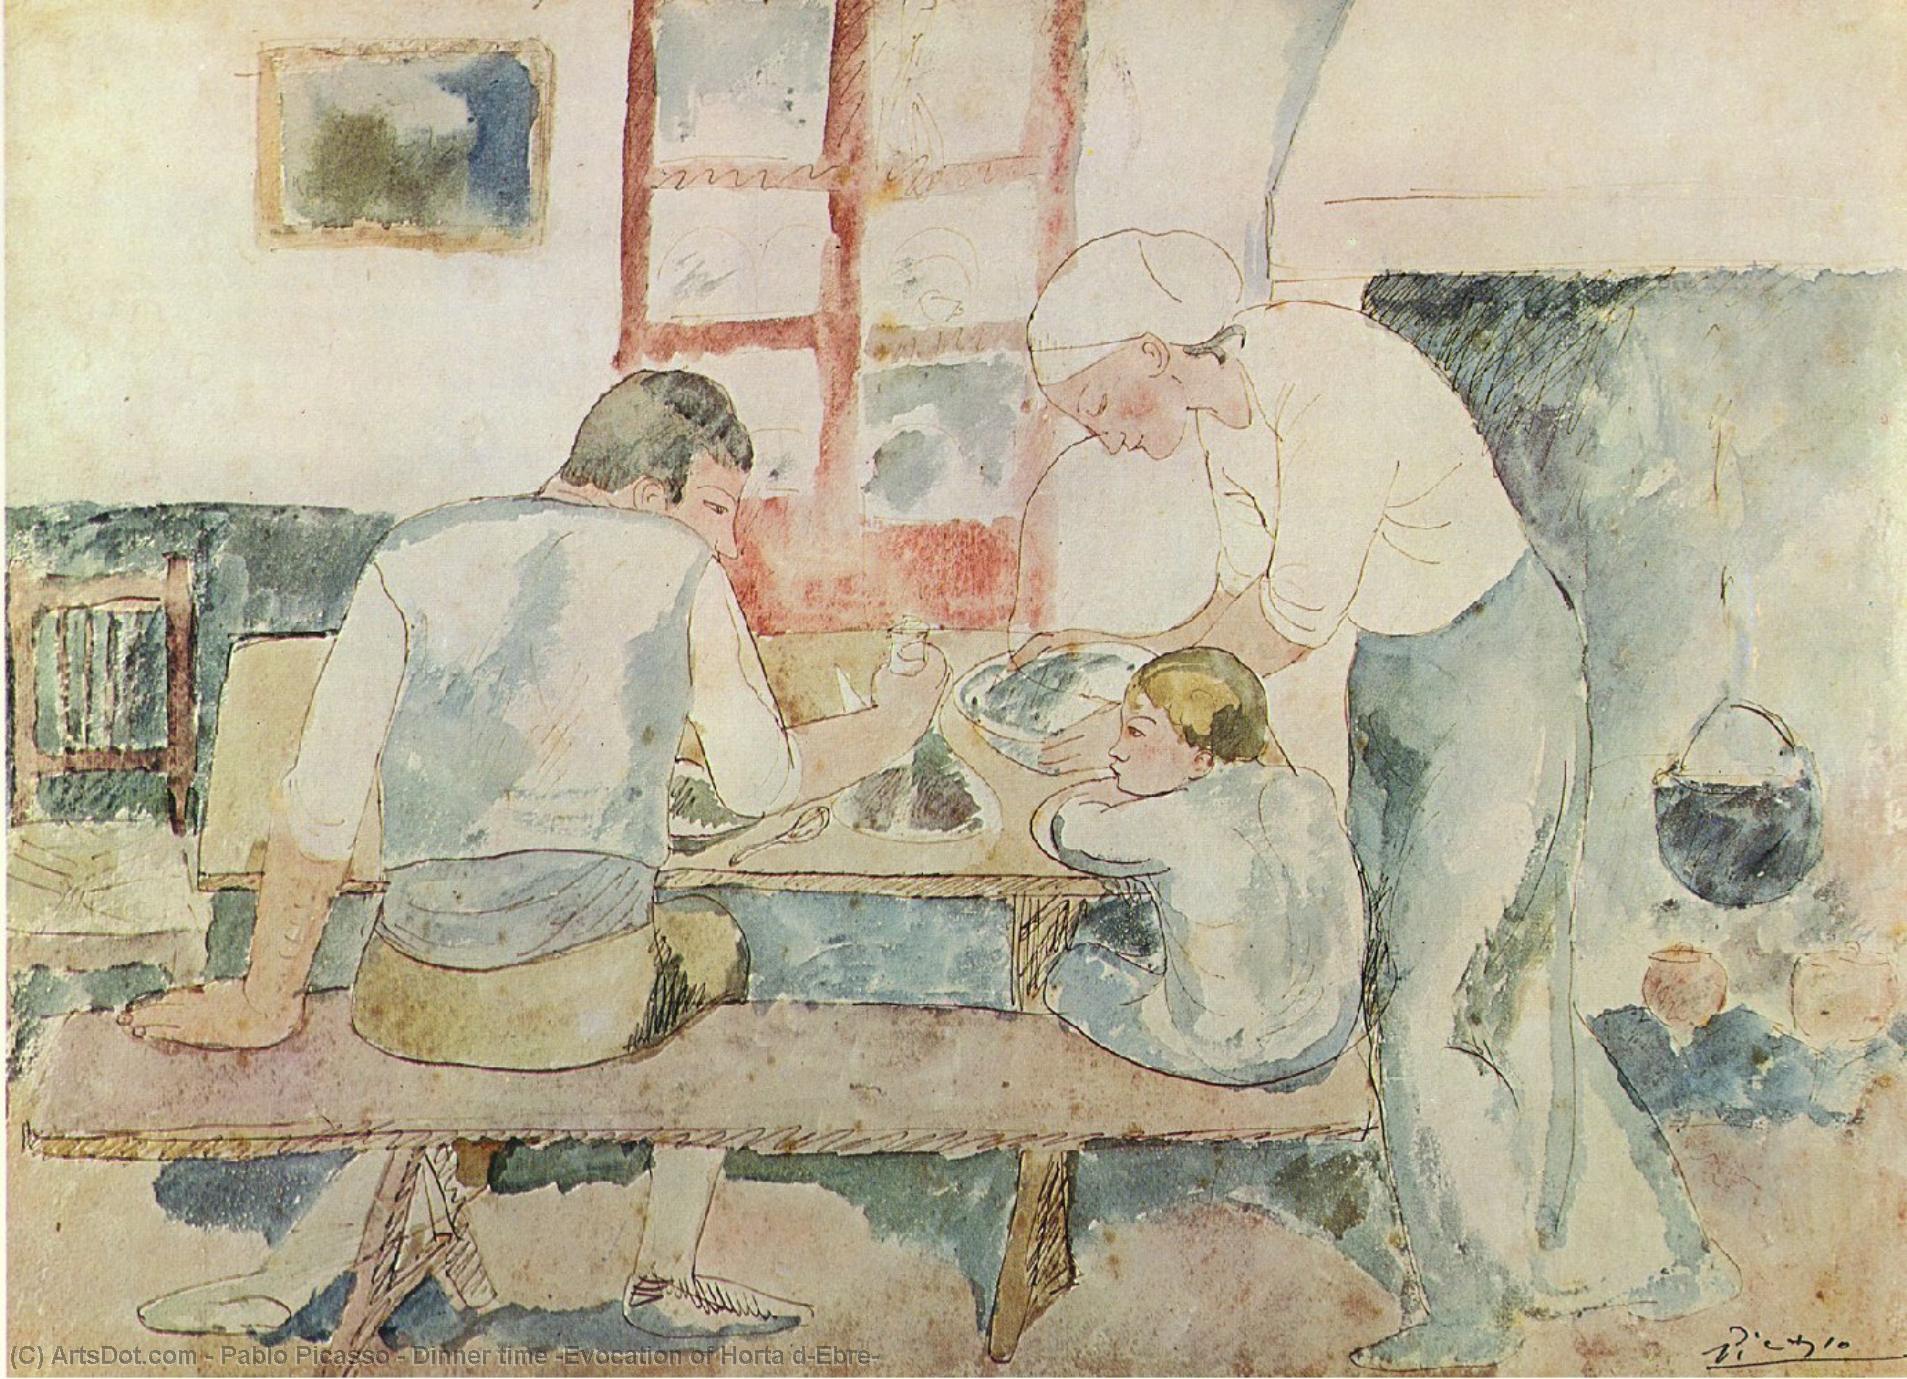 Wikioo.org - สารานุกรมวิจิตรศิลป์ - จิตรกรรม Pablo Picasso - Dinner time (Evocation of Horta d'Ebre)